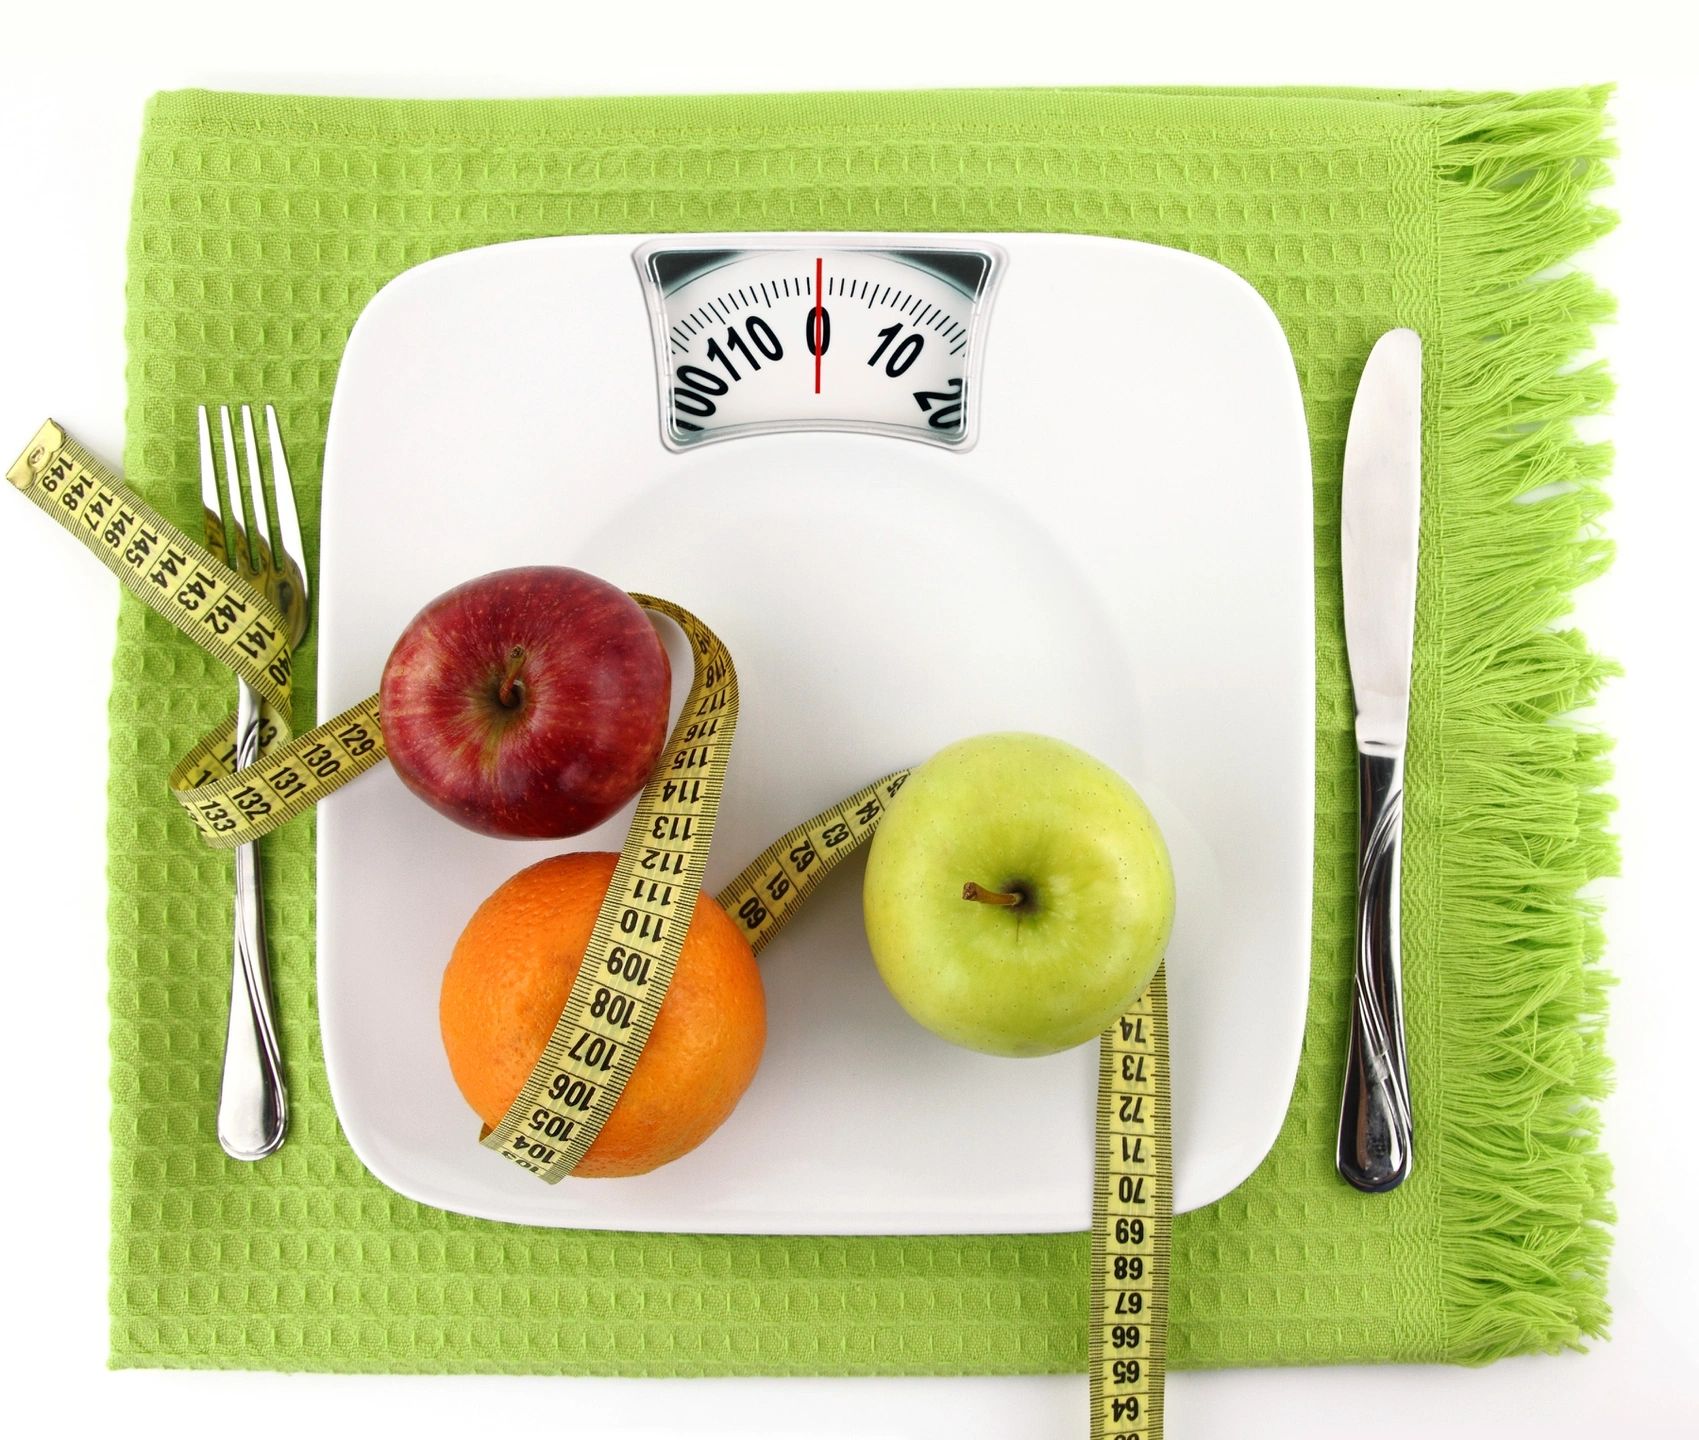 Apples and a measuring tape on a weighing scale with a fork and knife